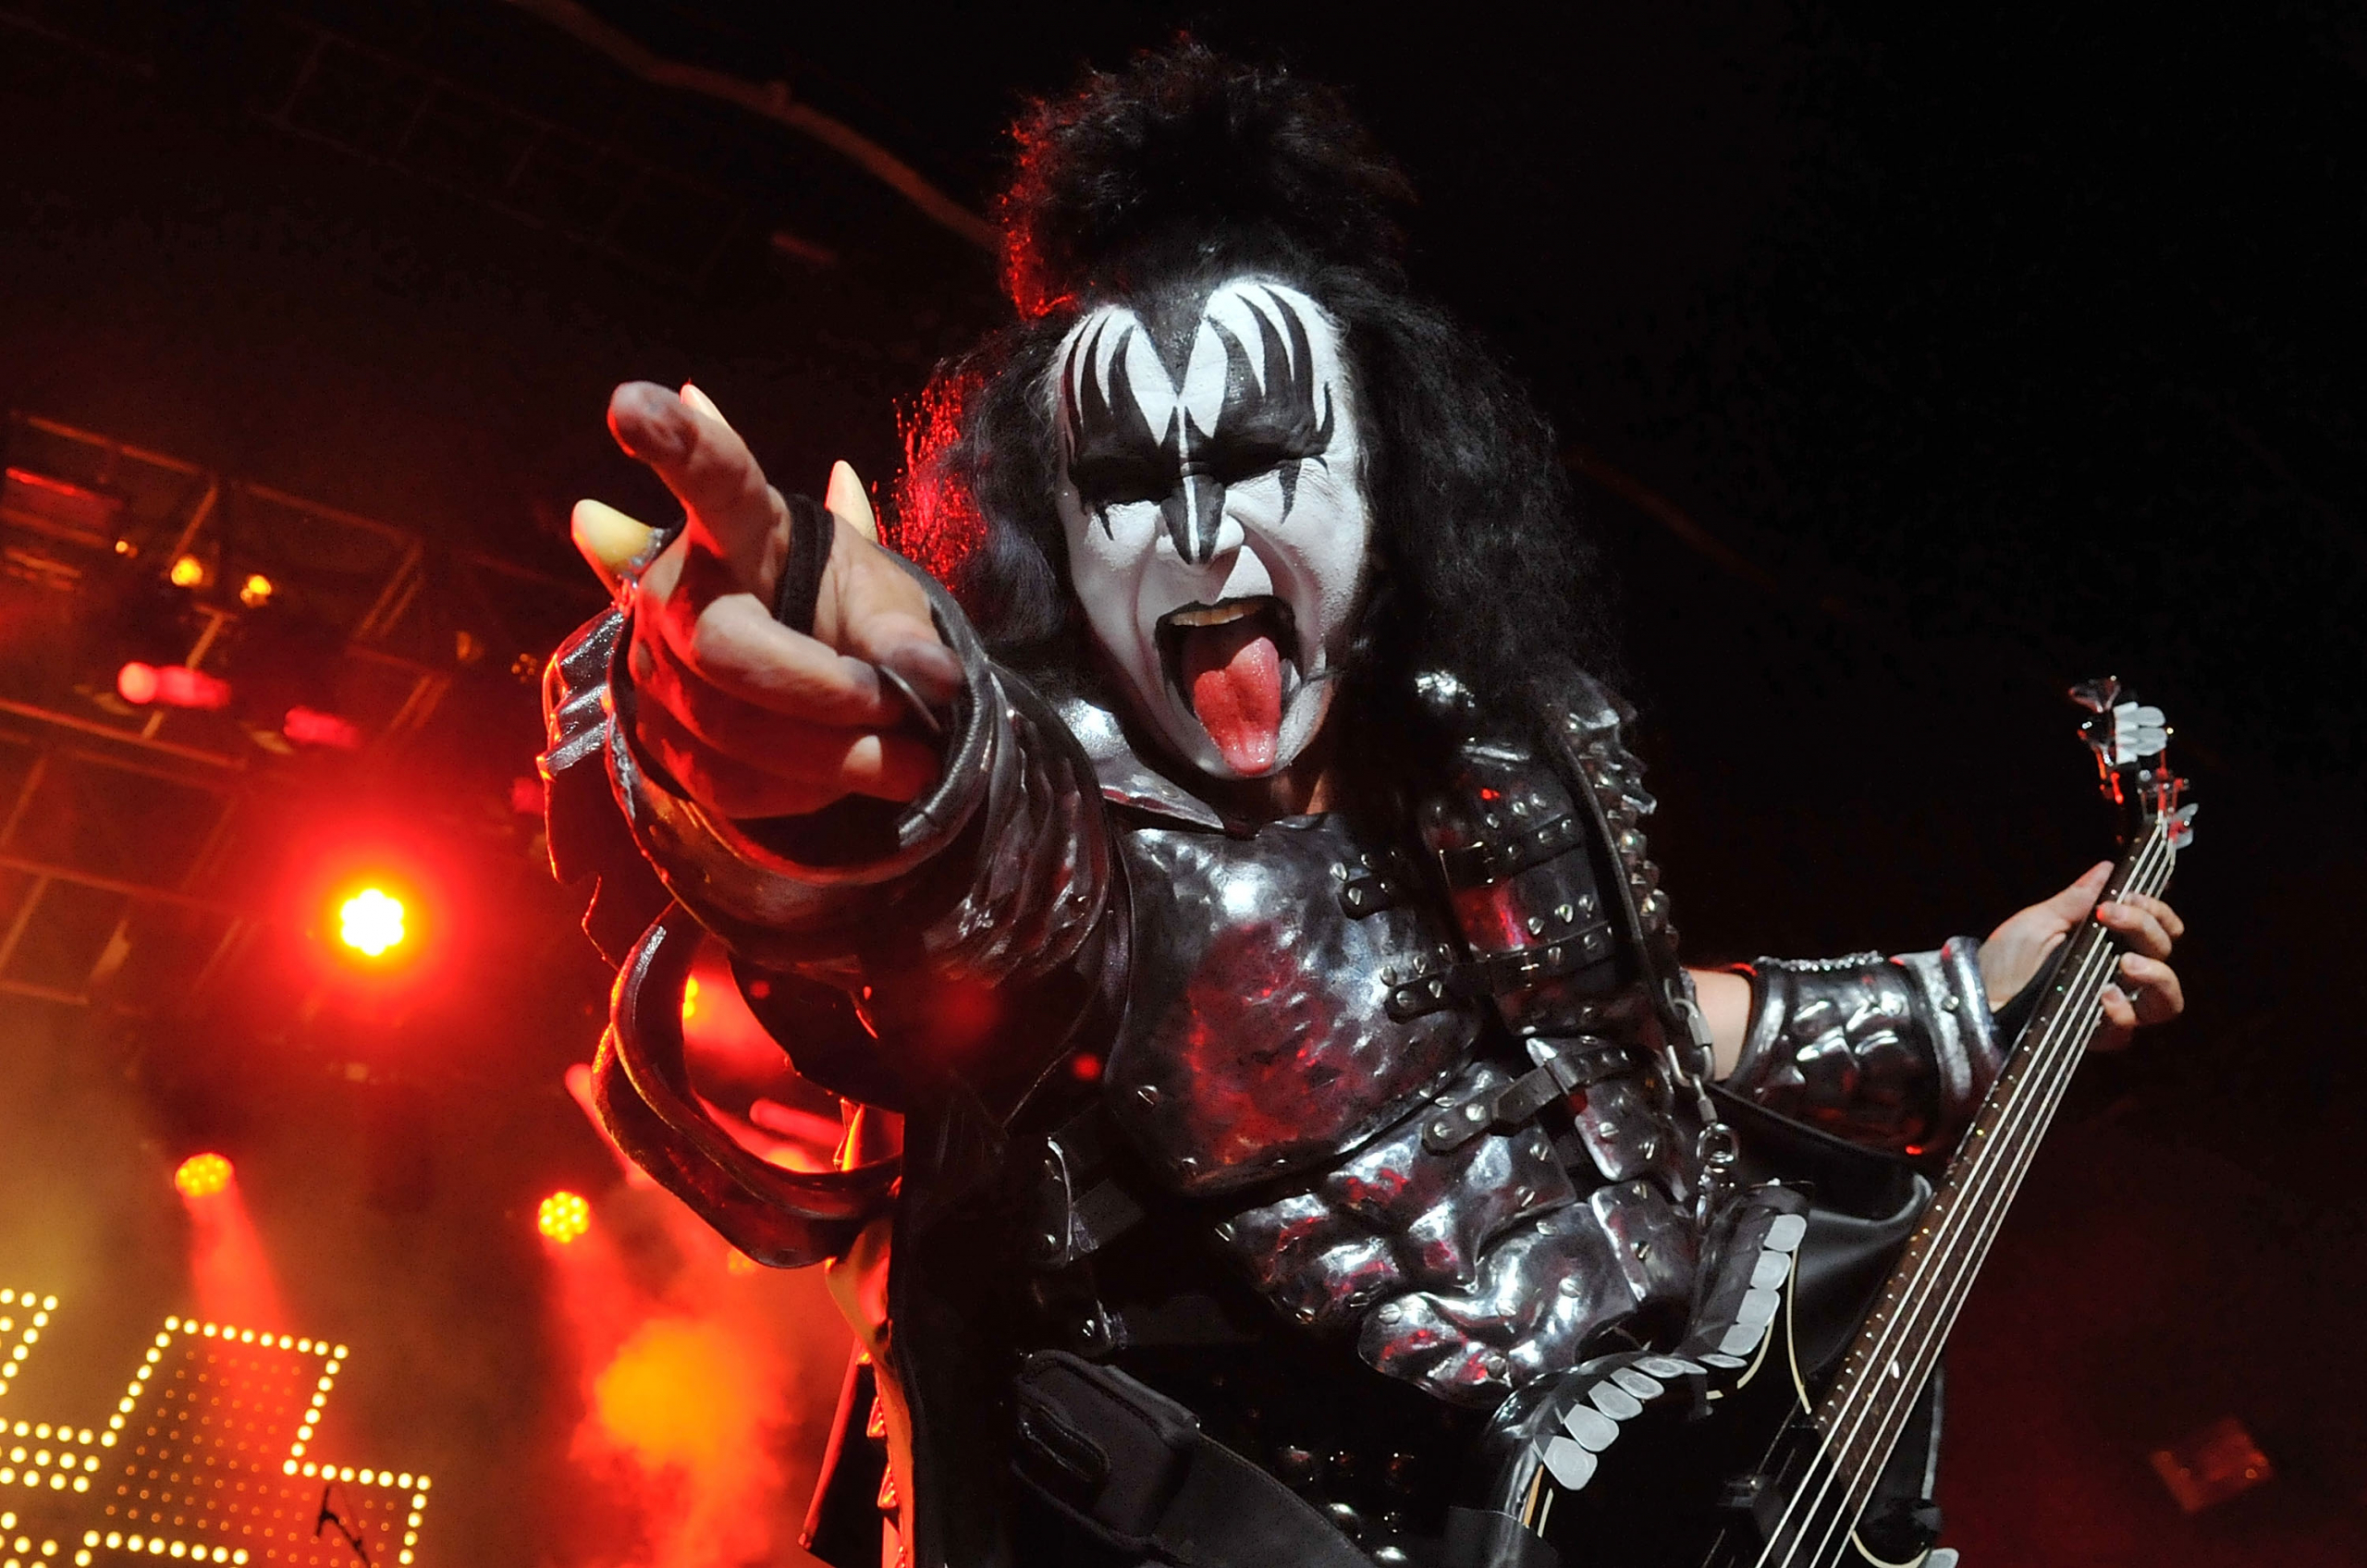 KISS Displaying Australian Flag During Concert In Austria